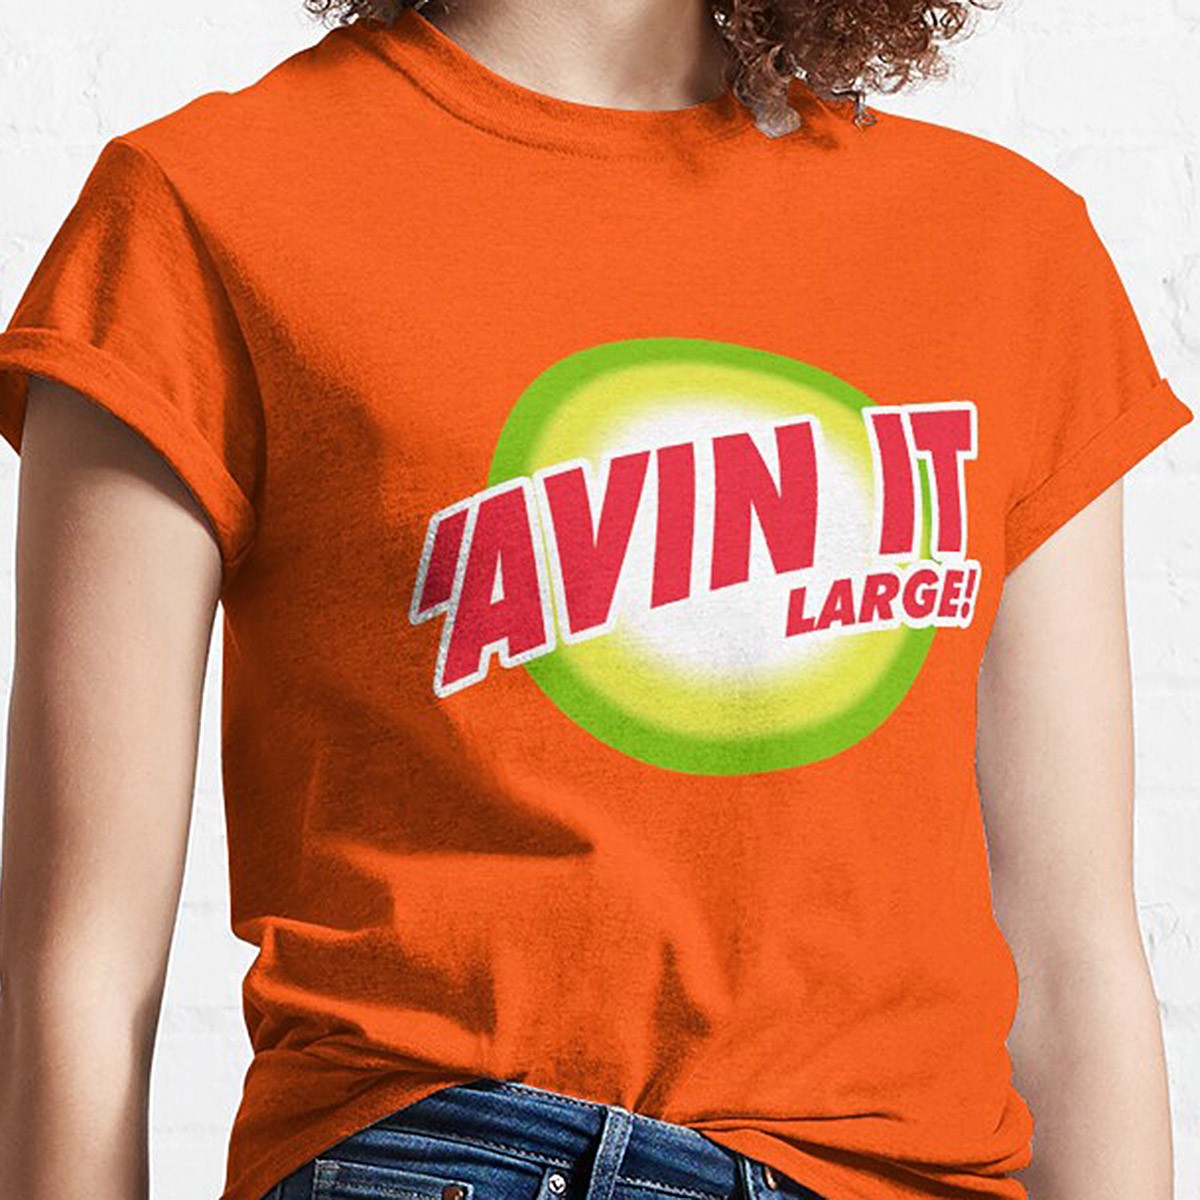 'Avin It Large! - Classic T-Shirt by NTK Apparel